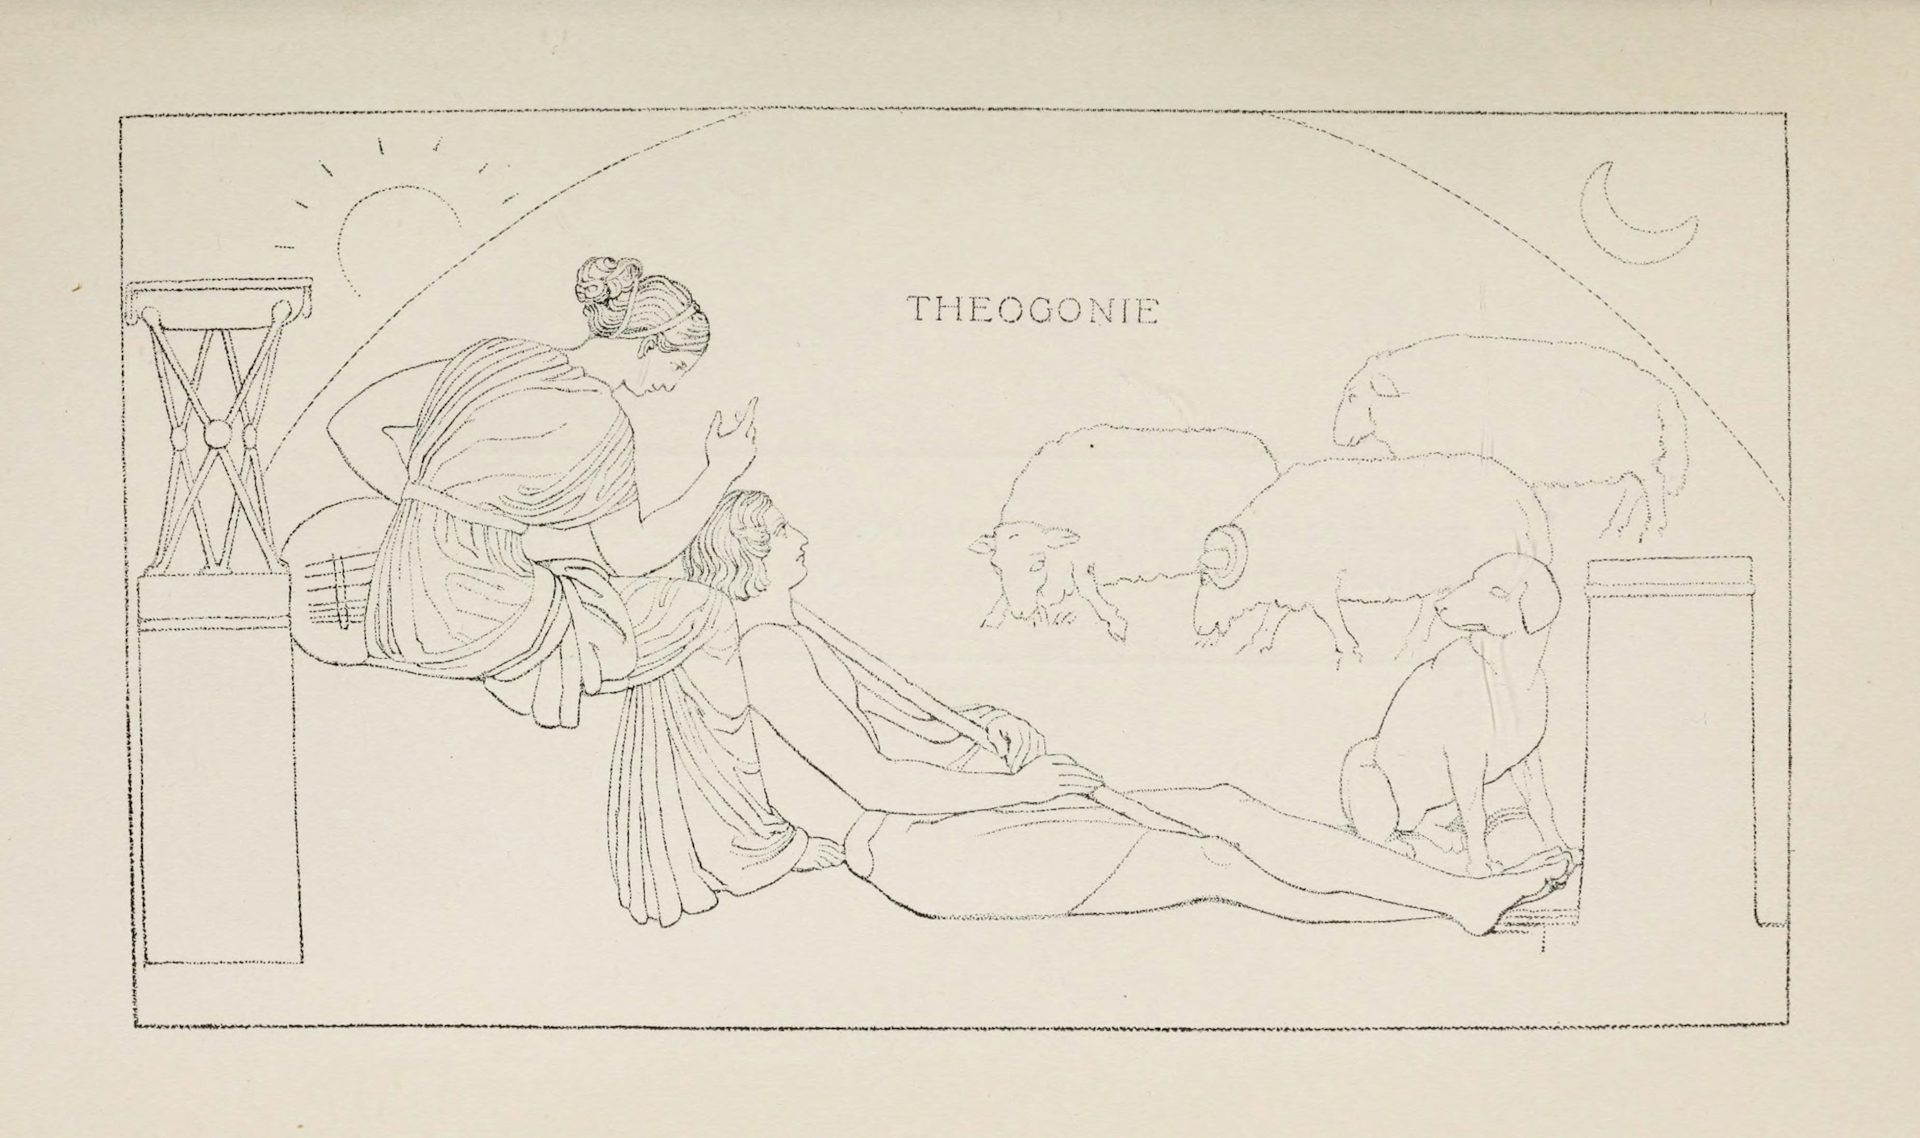 Illustration of the Muse inspiring Hesiod to compose the Theogony by John Flaxman